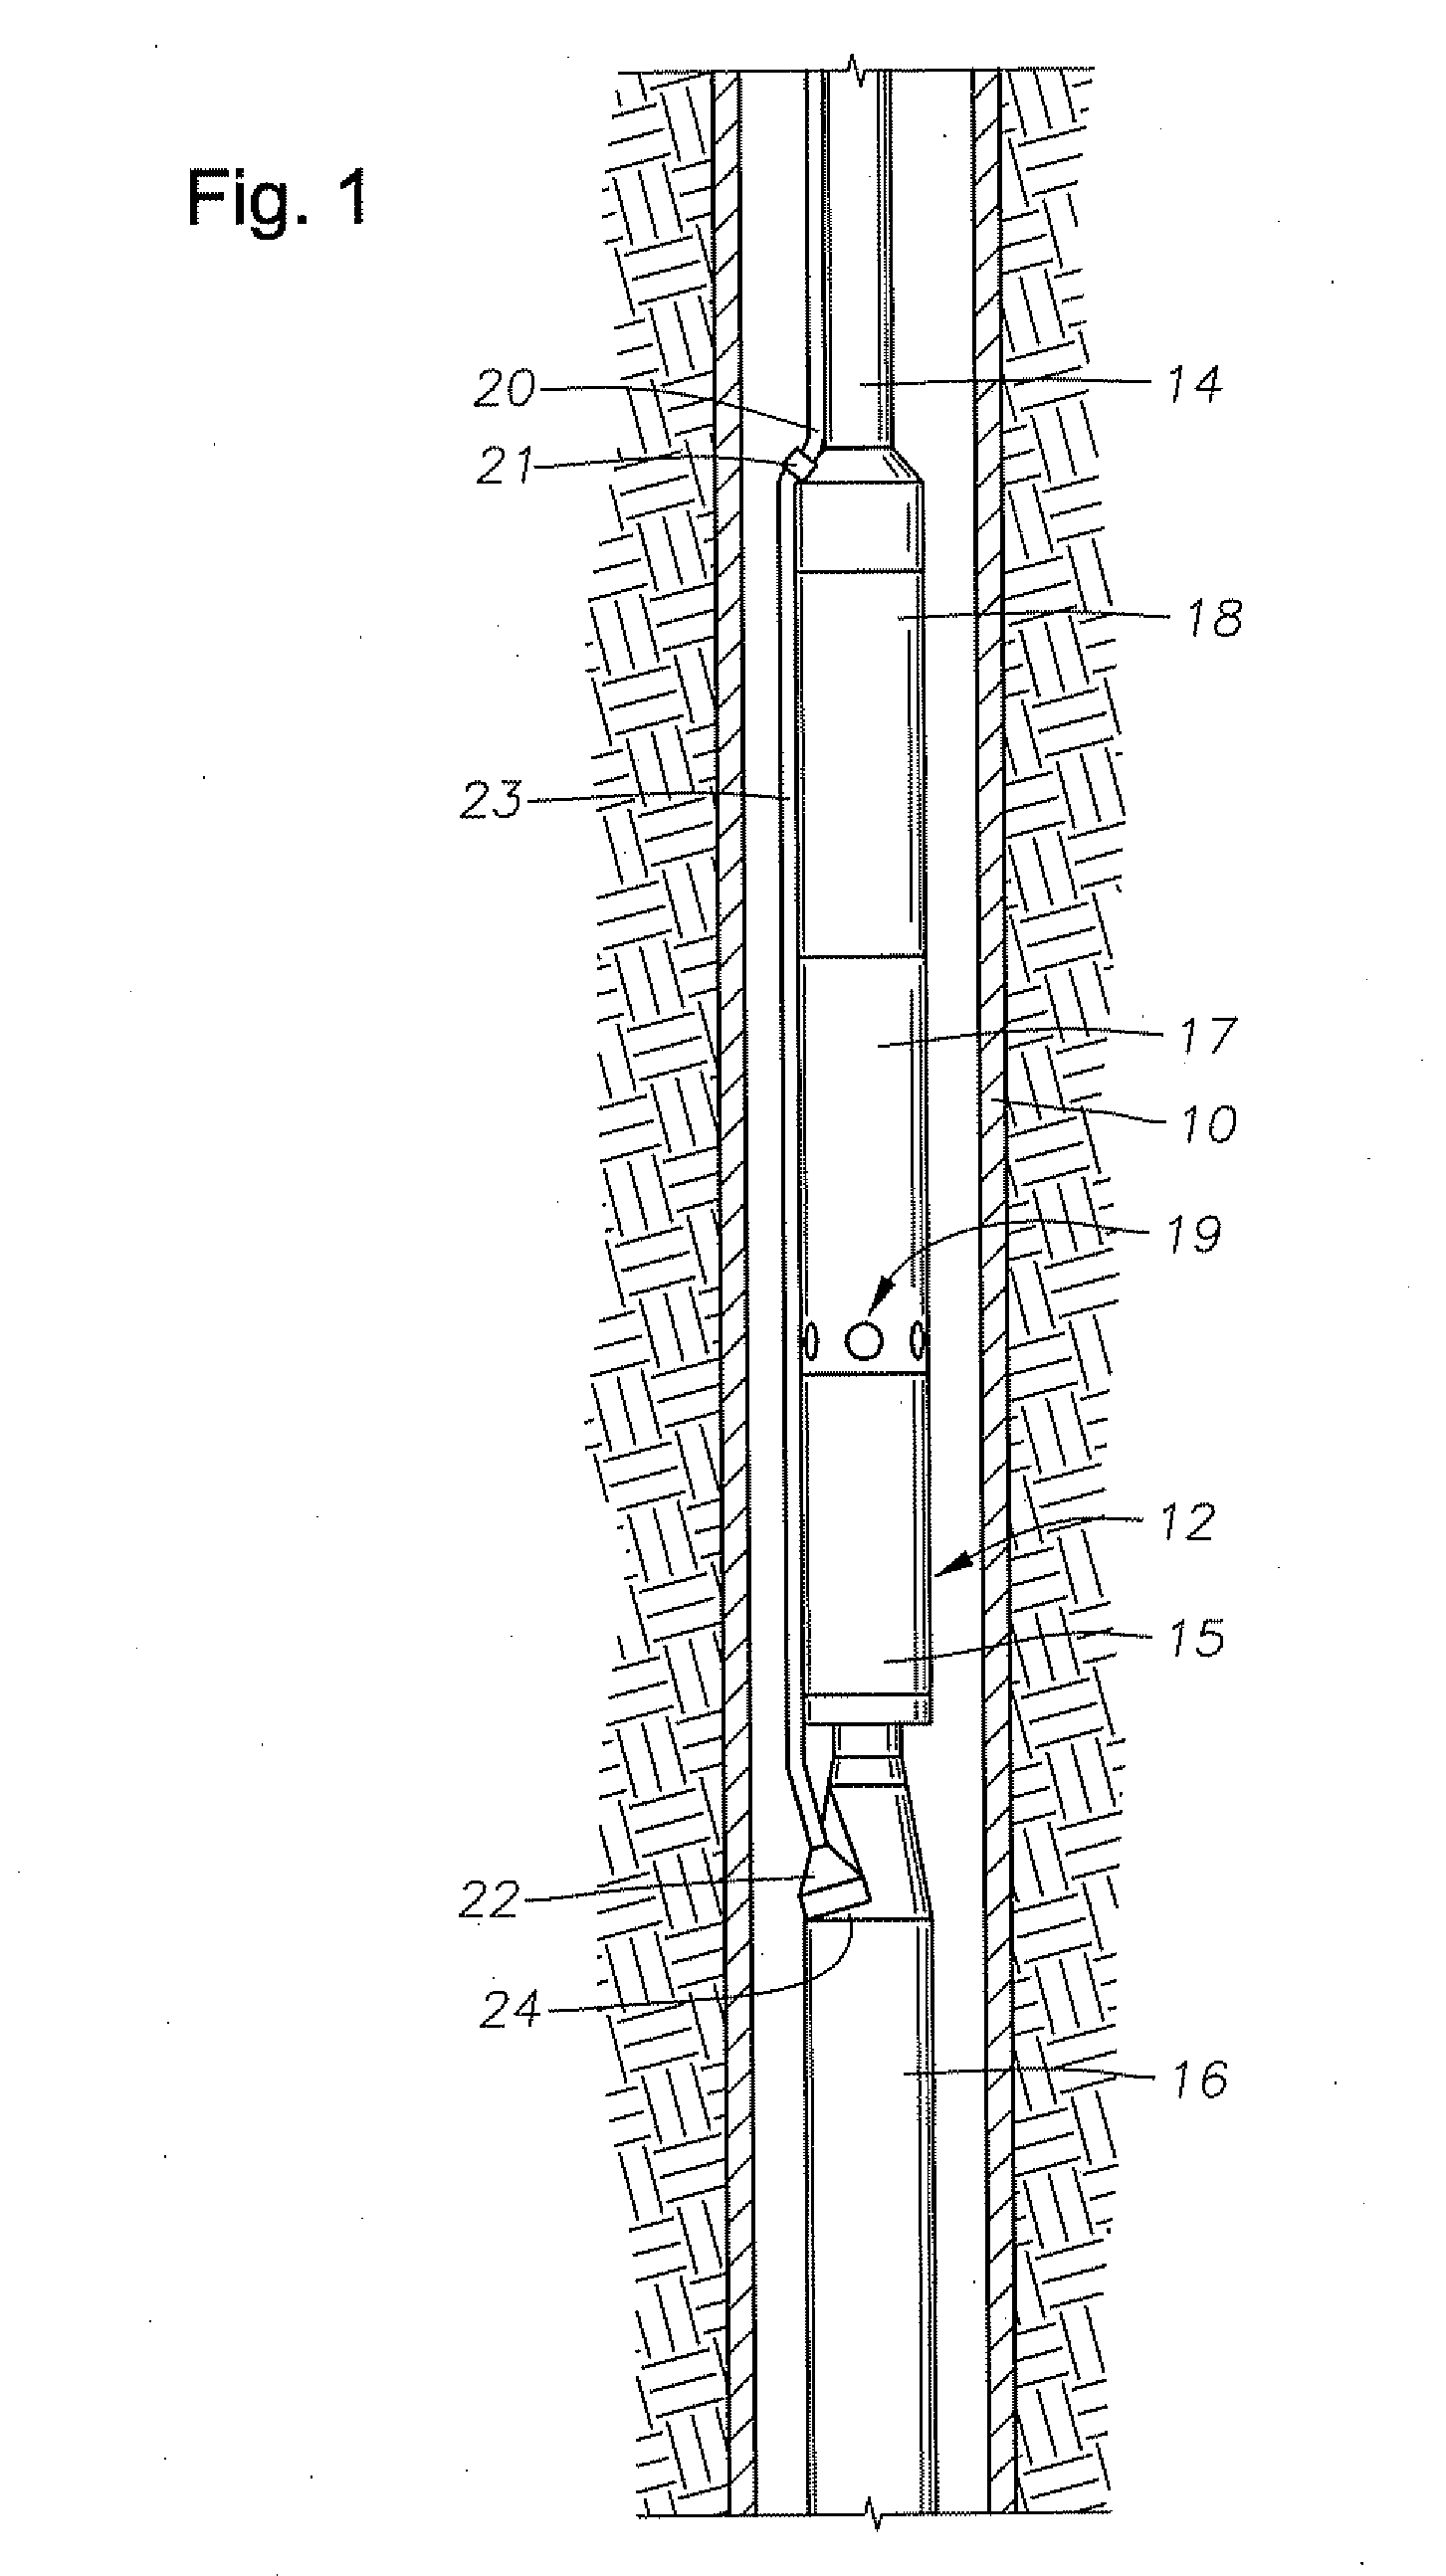 Apparatus and methods of sealing and fastening pothead to power cable